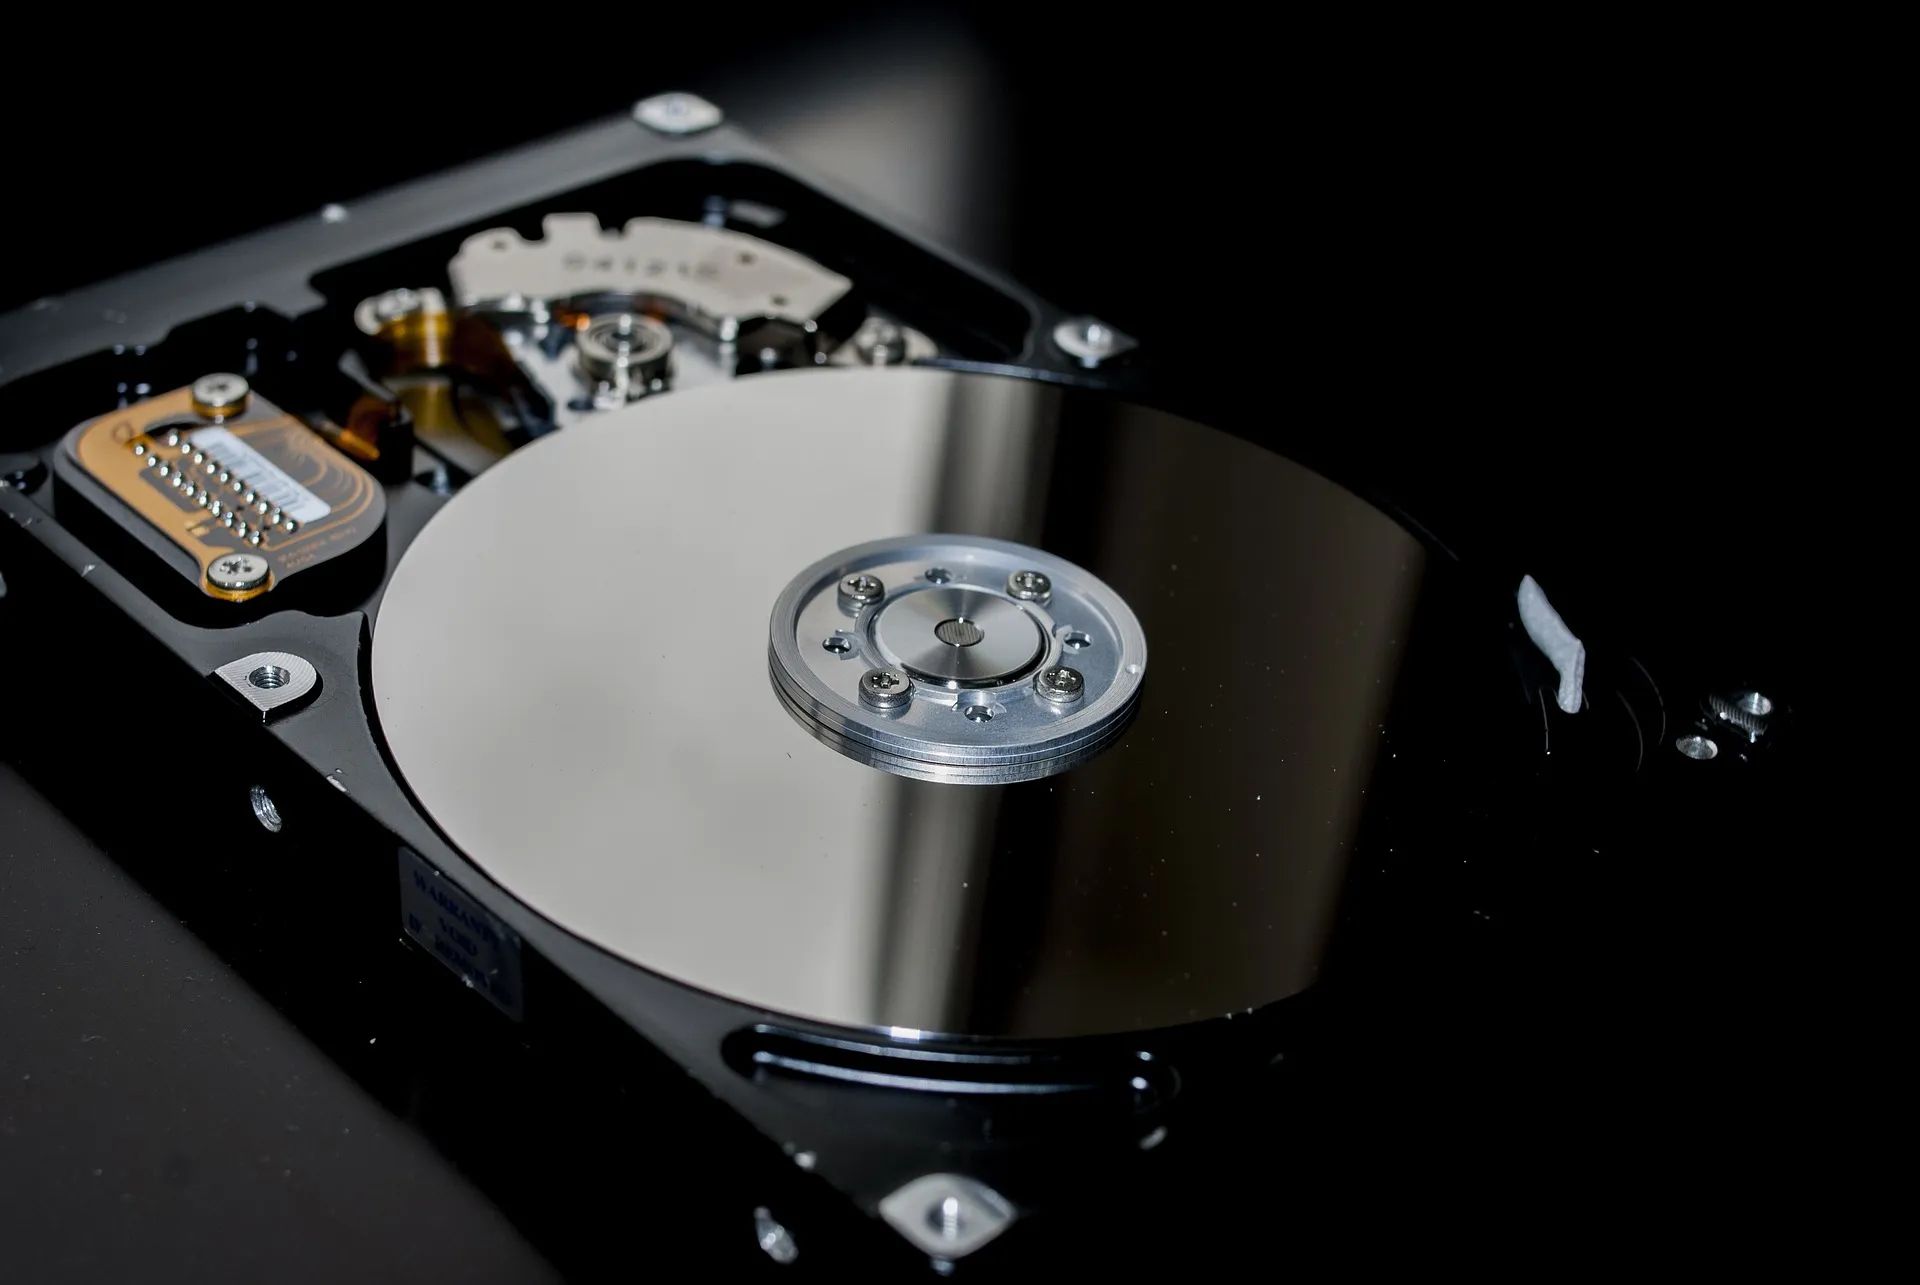 How To Find Serial Number Of Hard Disk Drive Windows 10